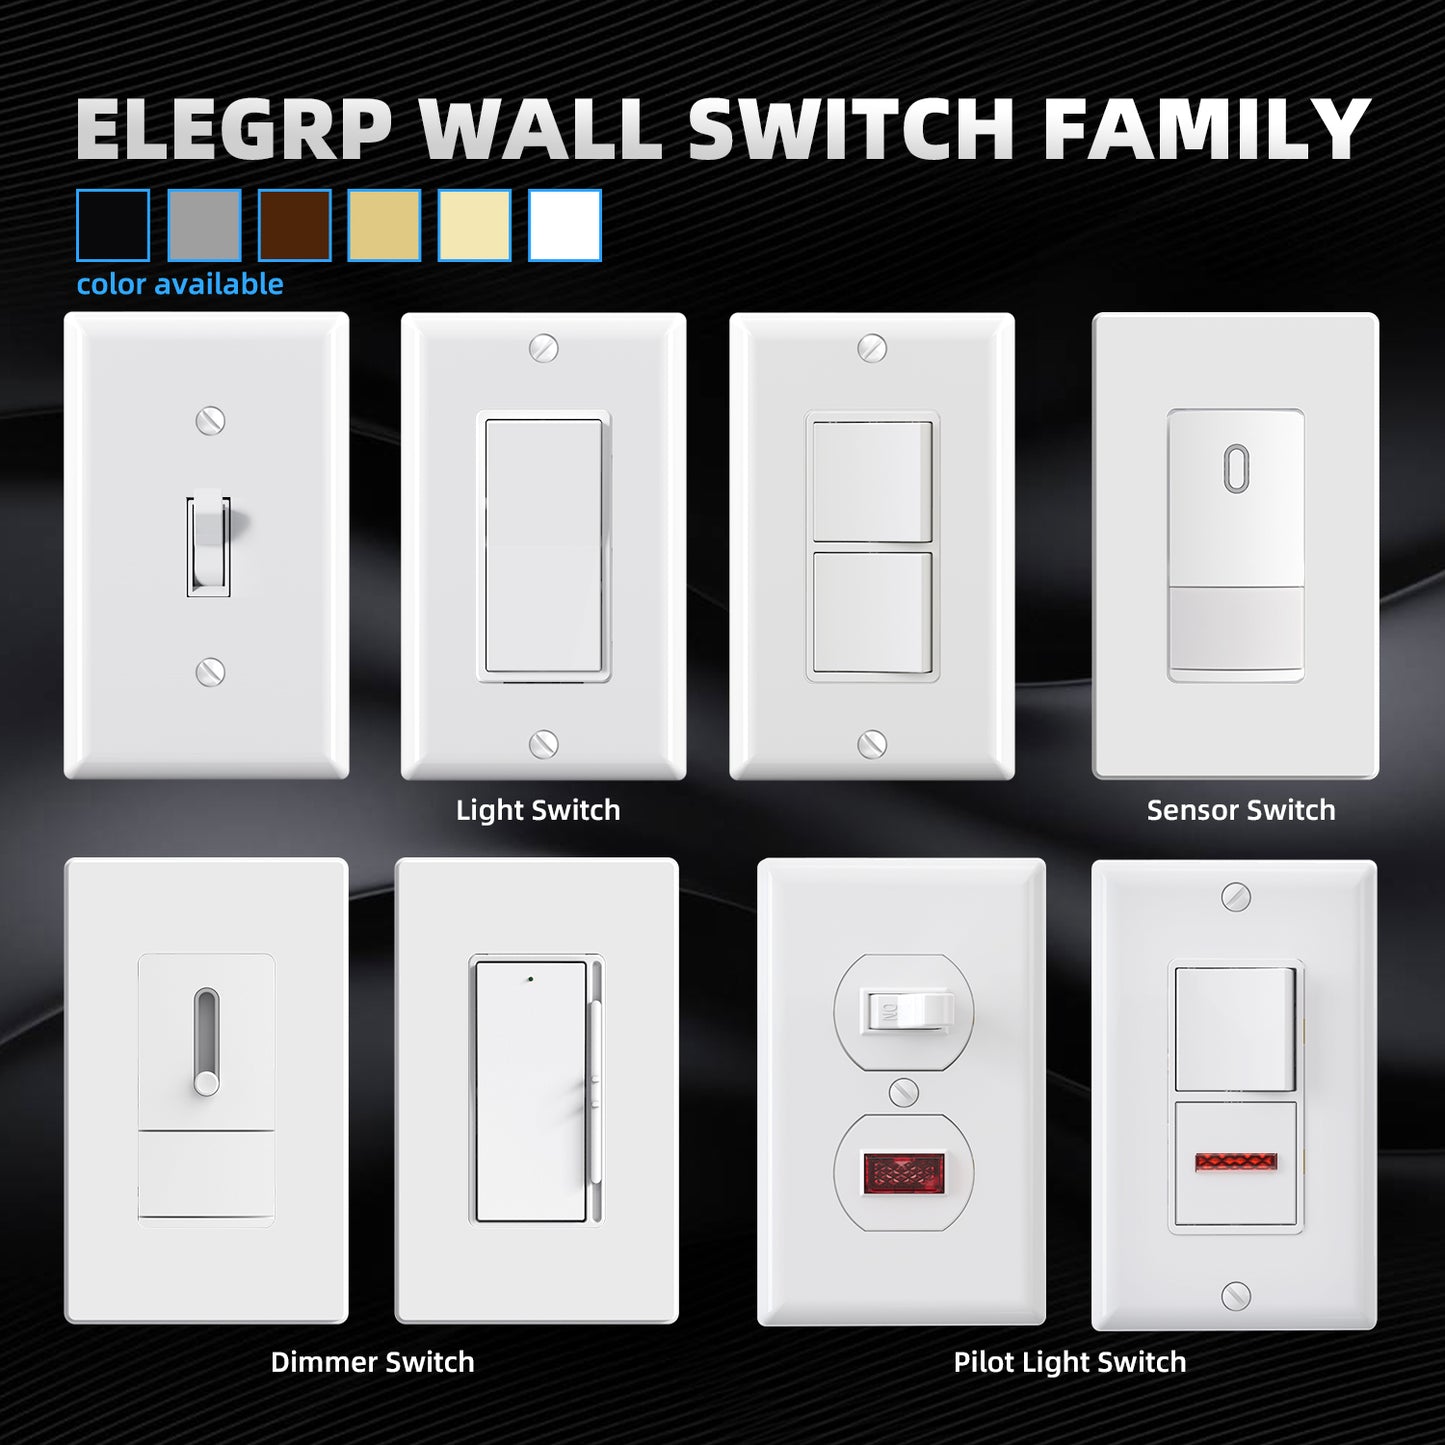 ELEGRP 4 Way Toggle Light Switch, 15 Amp, 120-277V, Toggle Framed AC Quiet Switch, in Wall On/Off Switch, Self-Grounding(10 Pack)